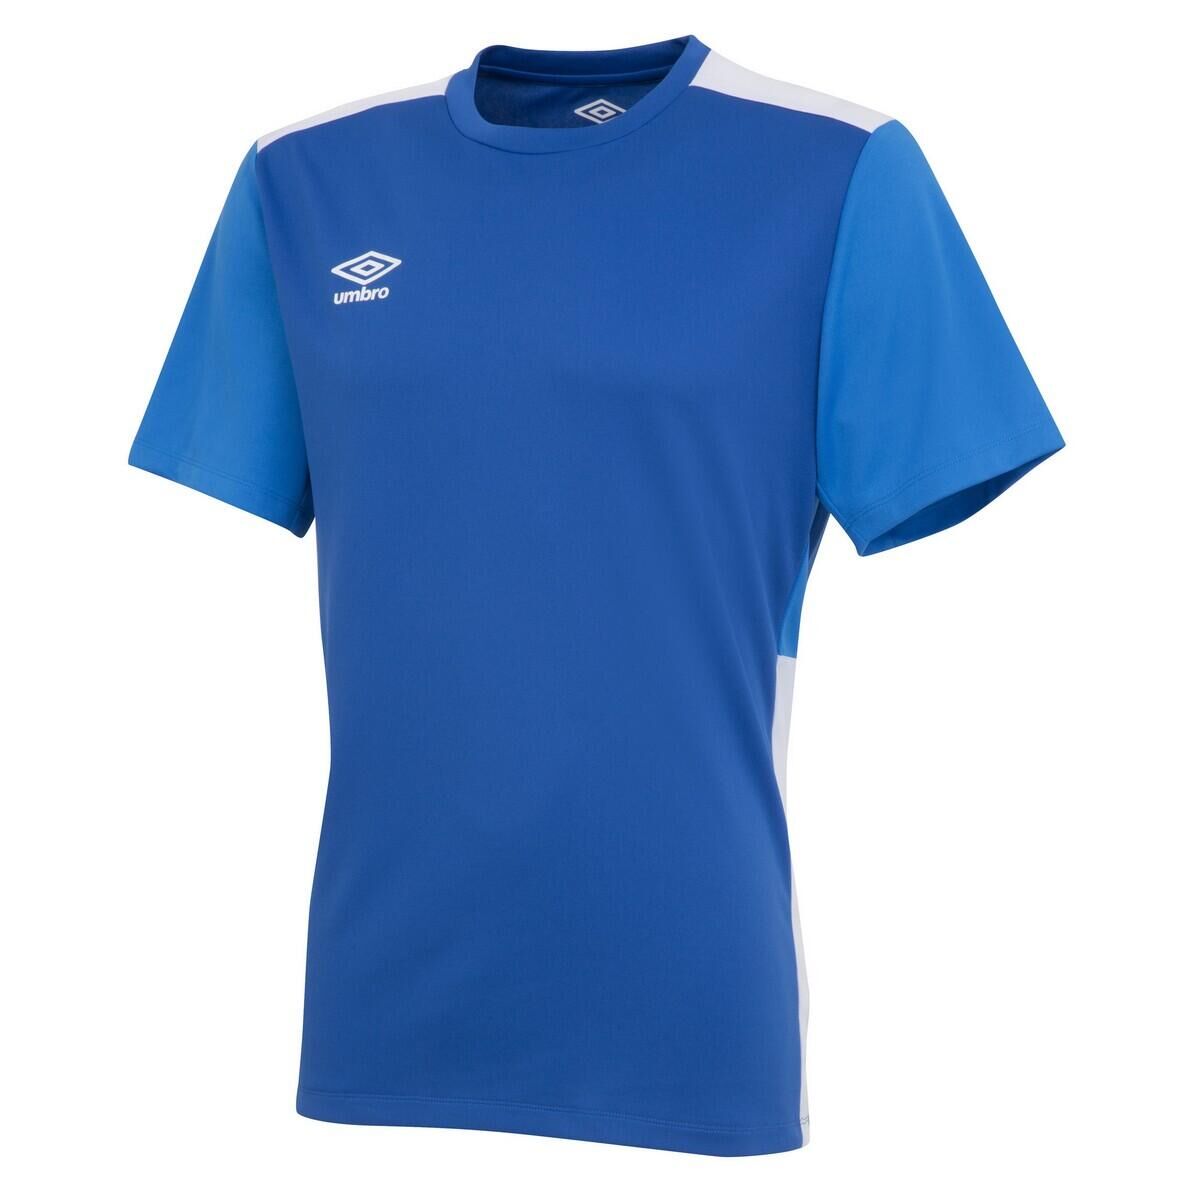 UMBRO Mens Contrast Training Jersey (Royal Blue/French Blue/White)